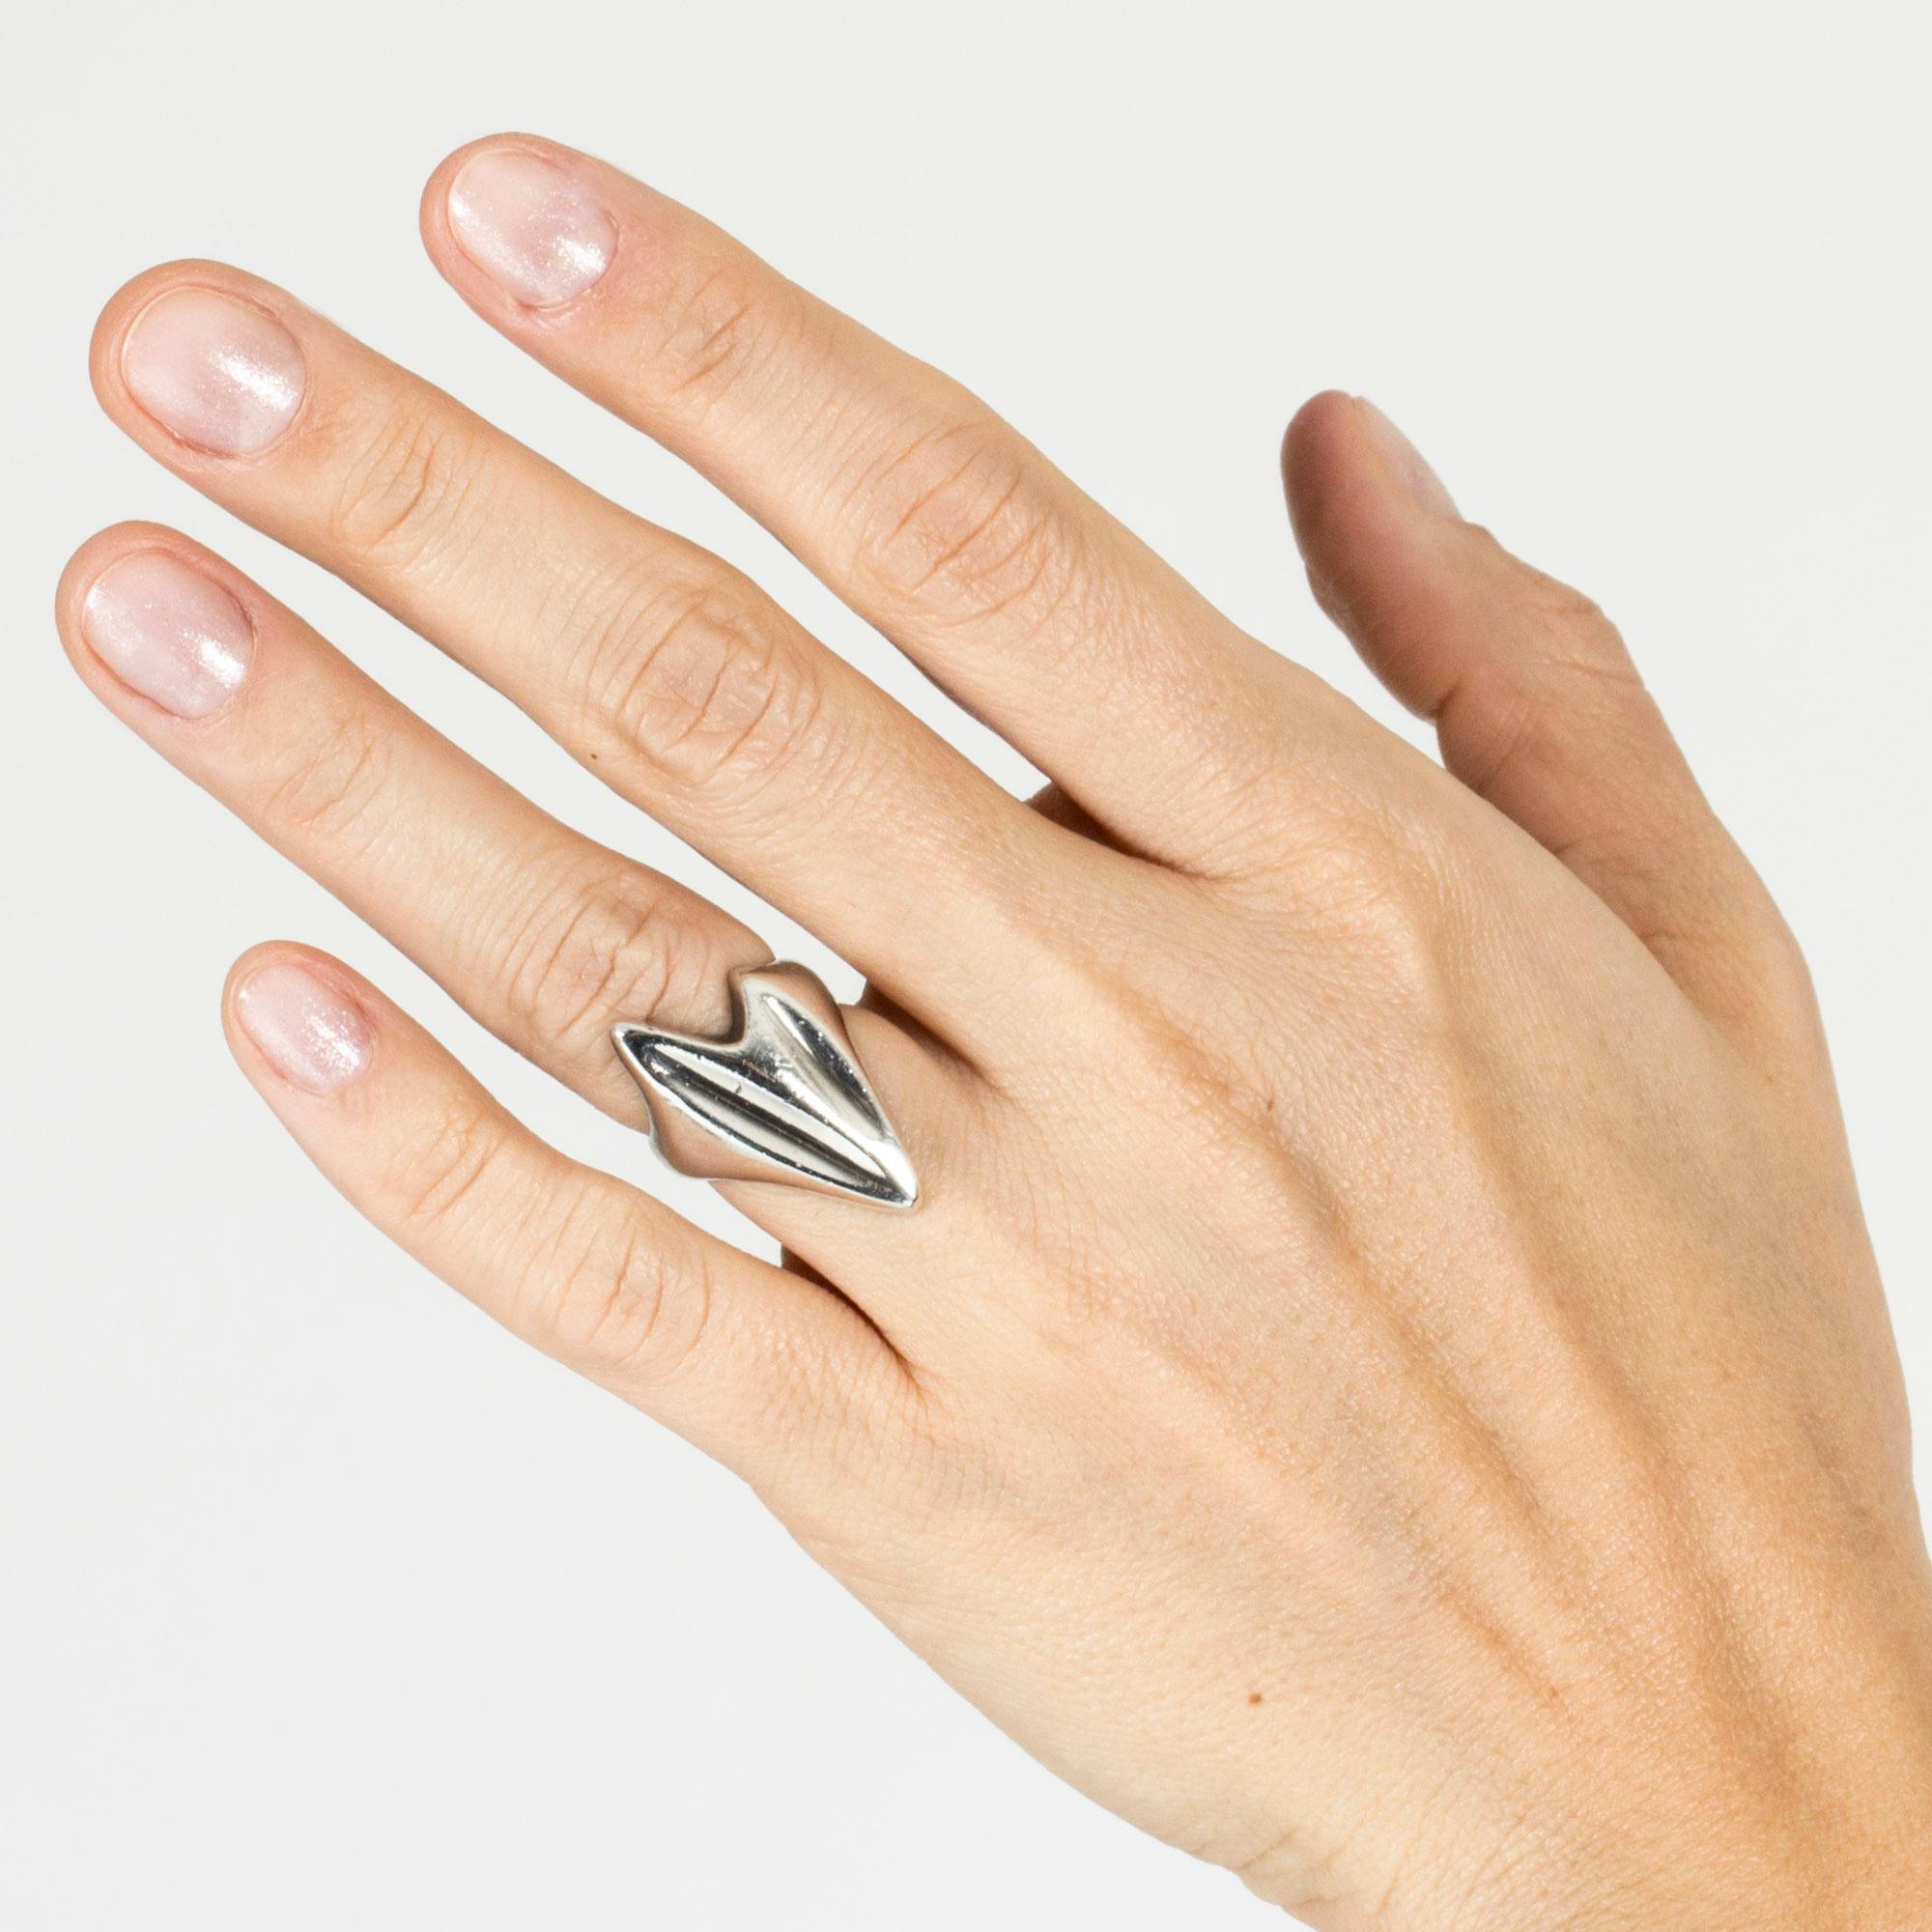 Expressive silver ring by the groundbreaking designer Henning Koppel who was responsible for taking the firm Georg Jensen to new heights from when he started there in 1946. He was a self-stated anti-functionalist and worked with imaginative